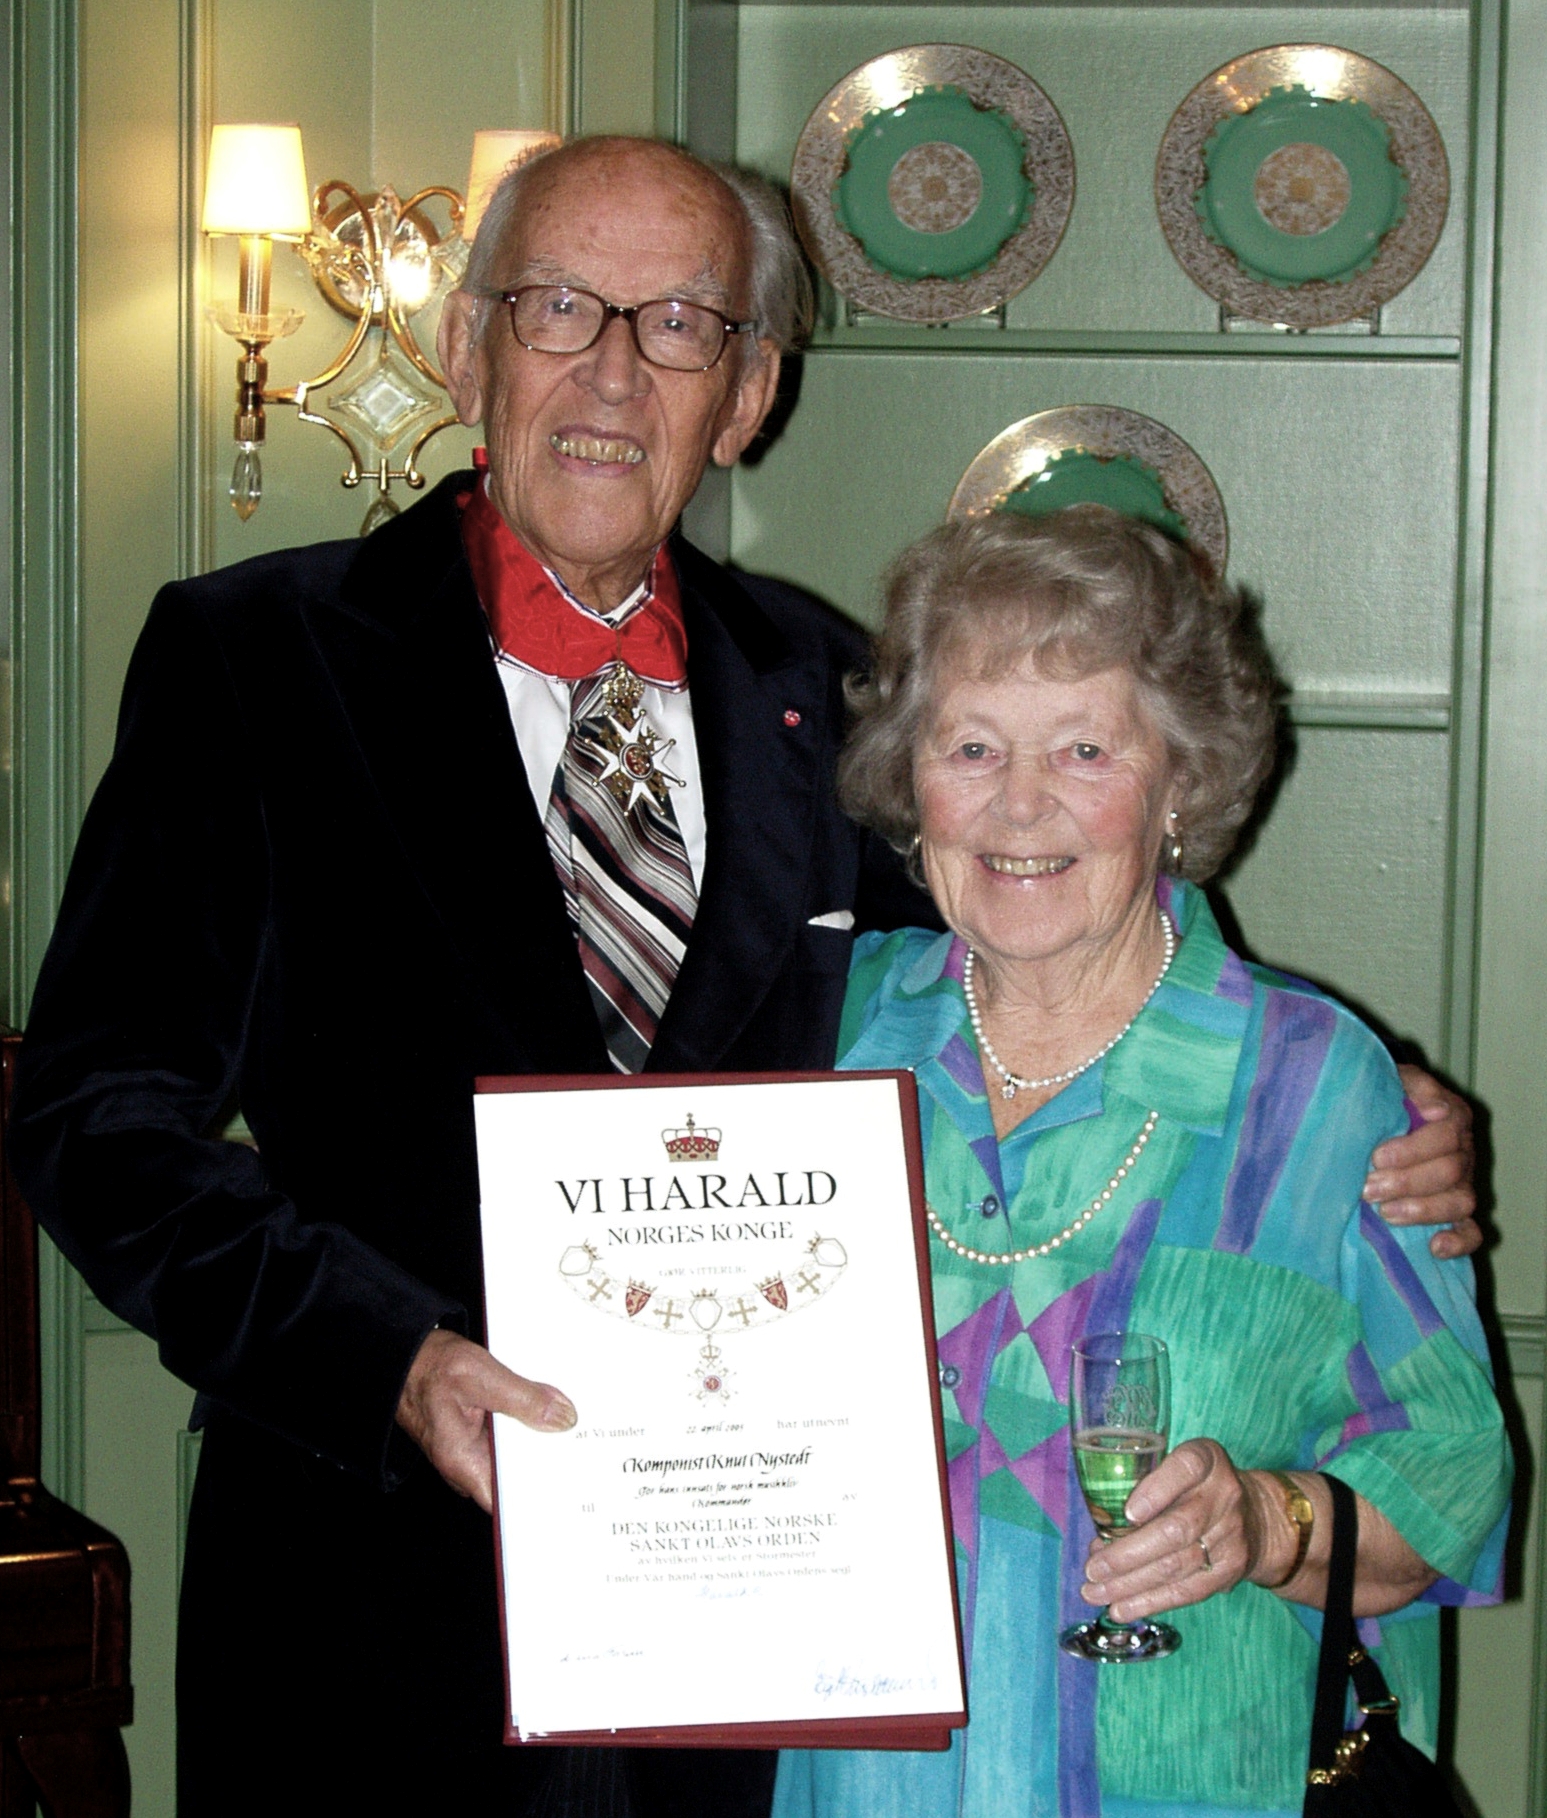 Picture of Knut Nystedt, with his wife Dua, receiving his Commander of St. Olav diploma.